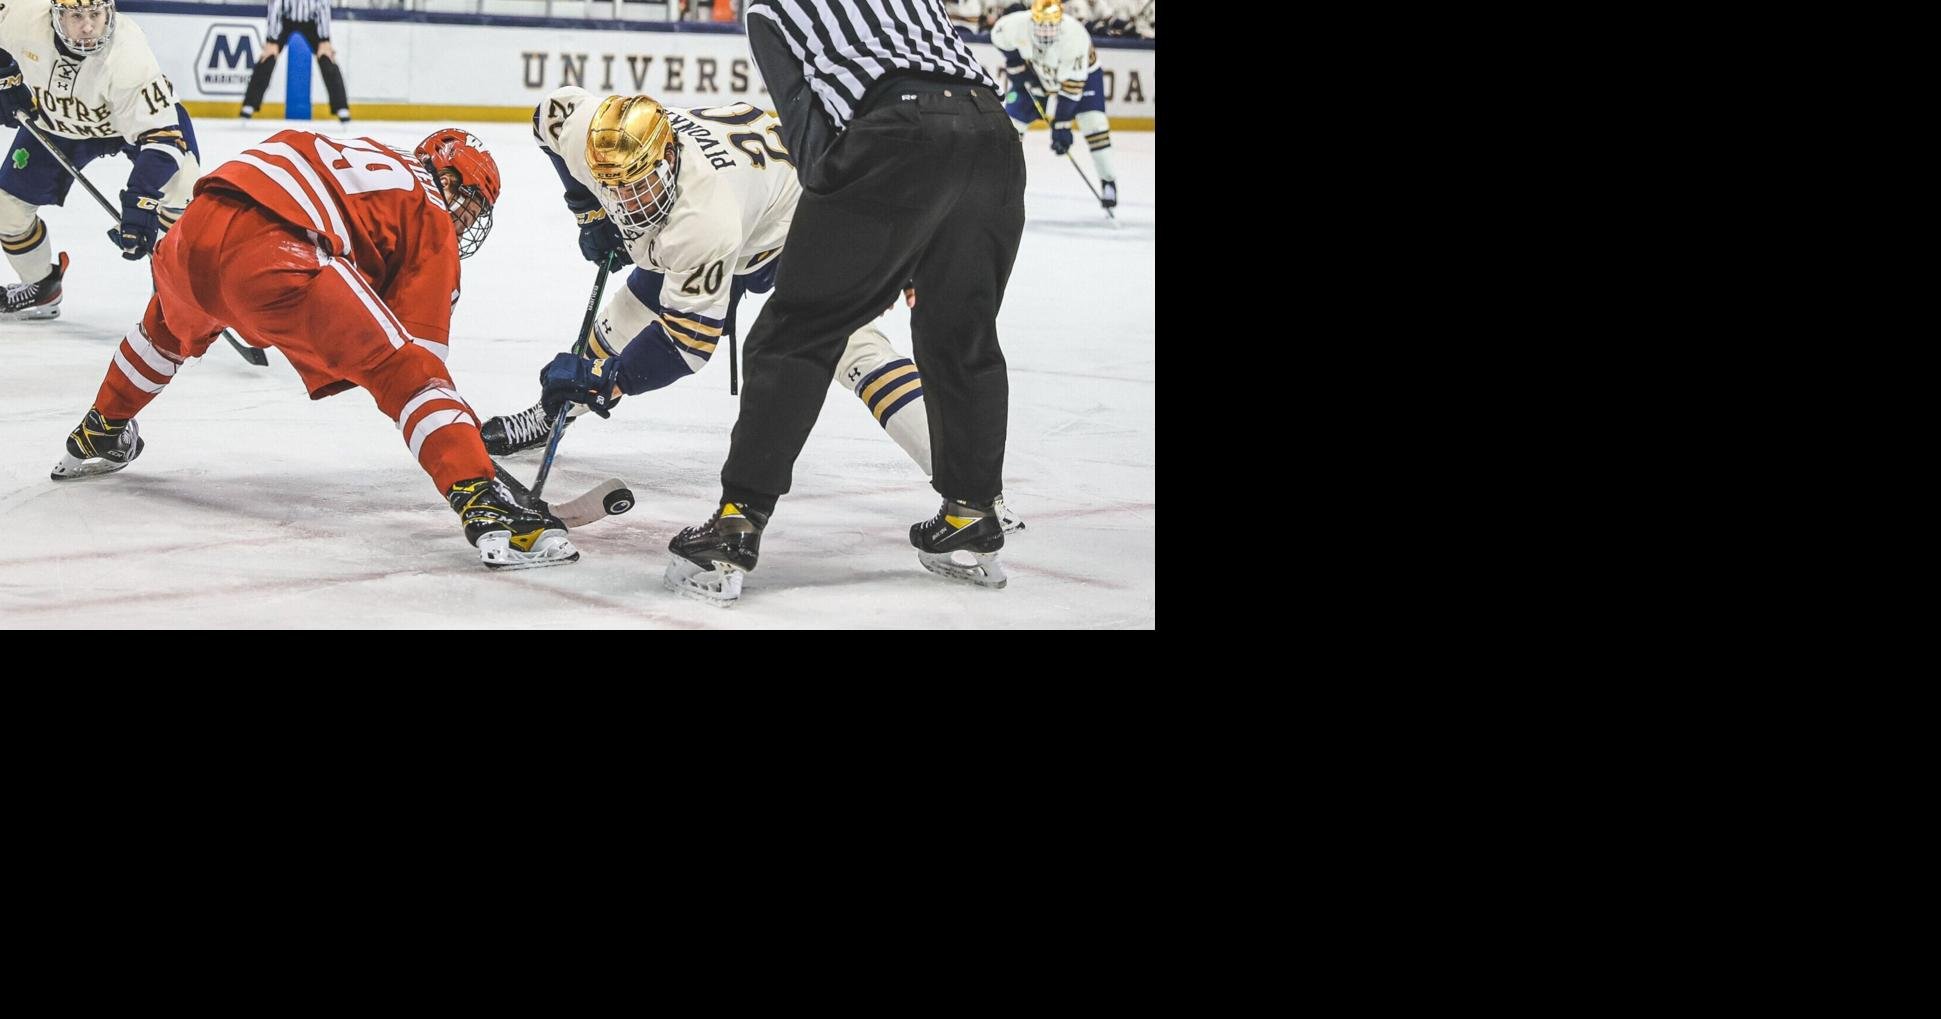 Notre Dame hockey splits with Alaska Fairbanks in New Year's matchup